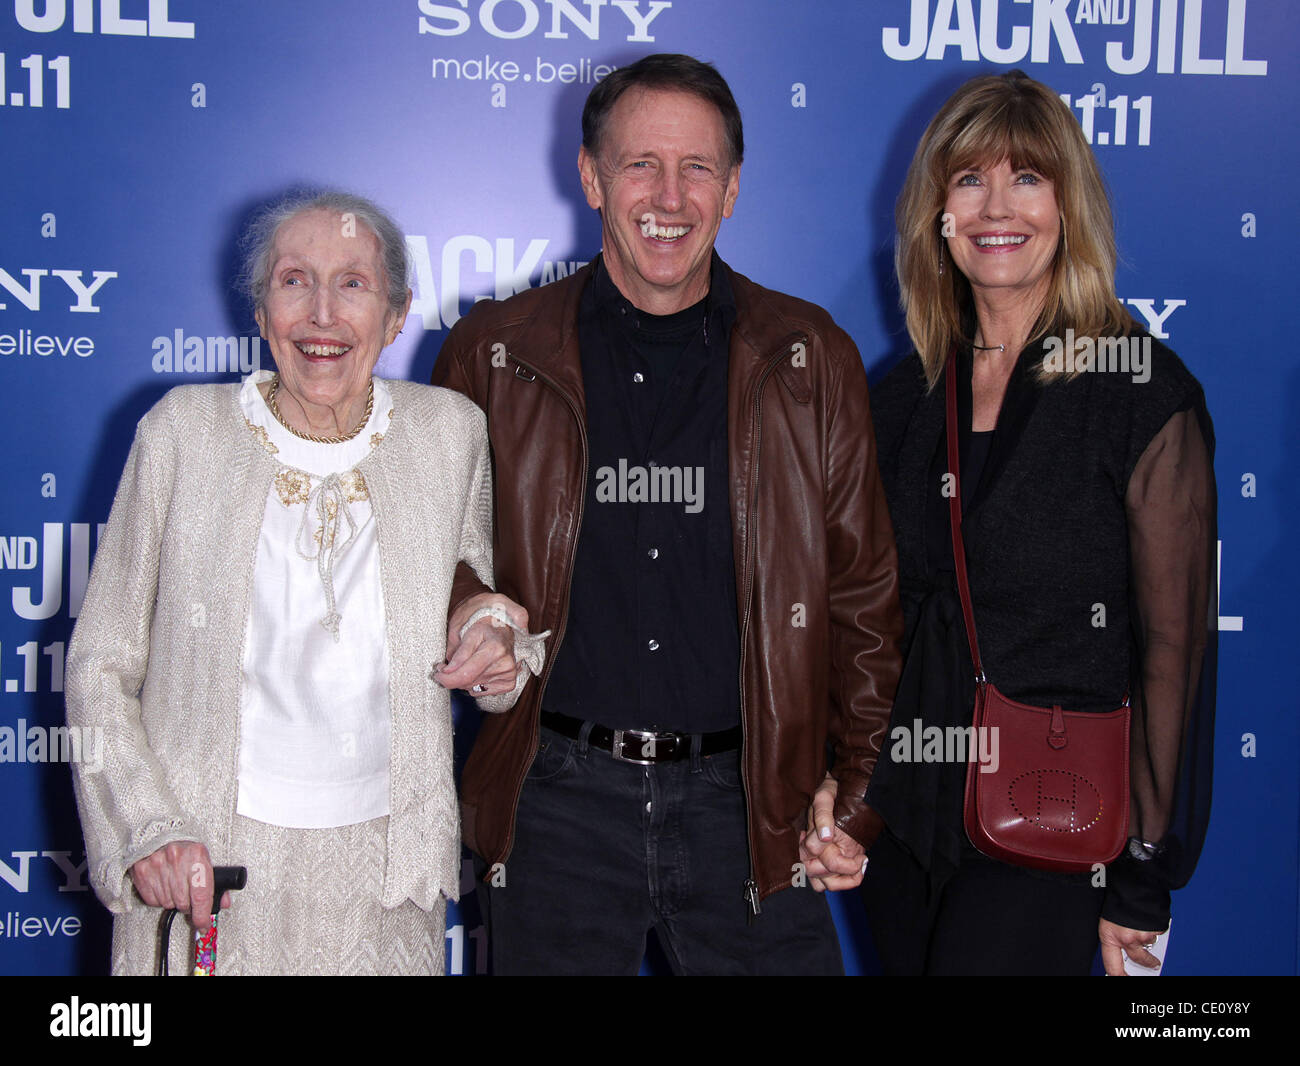 Nov. 6, 2011 - Westwood, California, U.S. - DENNIS DUGAN & FAMILY arrives for the premiere of the film 'Jack and Jill' at the Village theater. (Credit Image: © Lisa O'Connor/ZUMAPRESS.com) Stock Photo